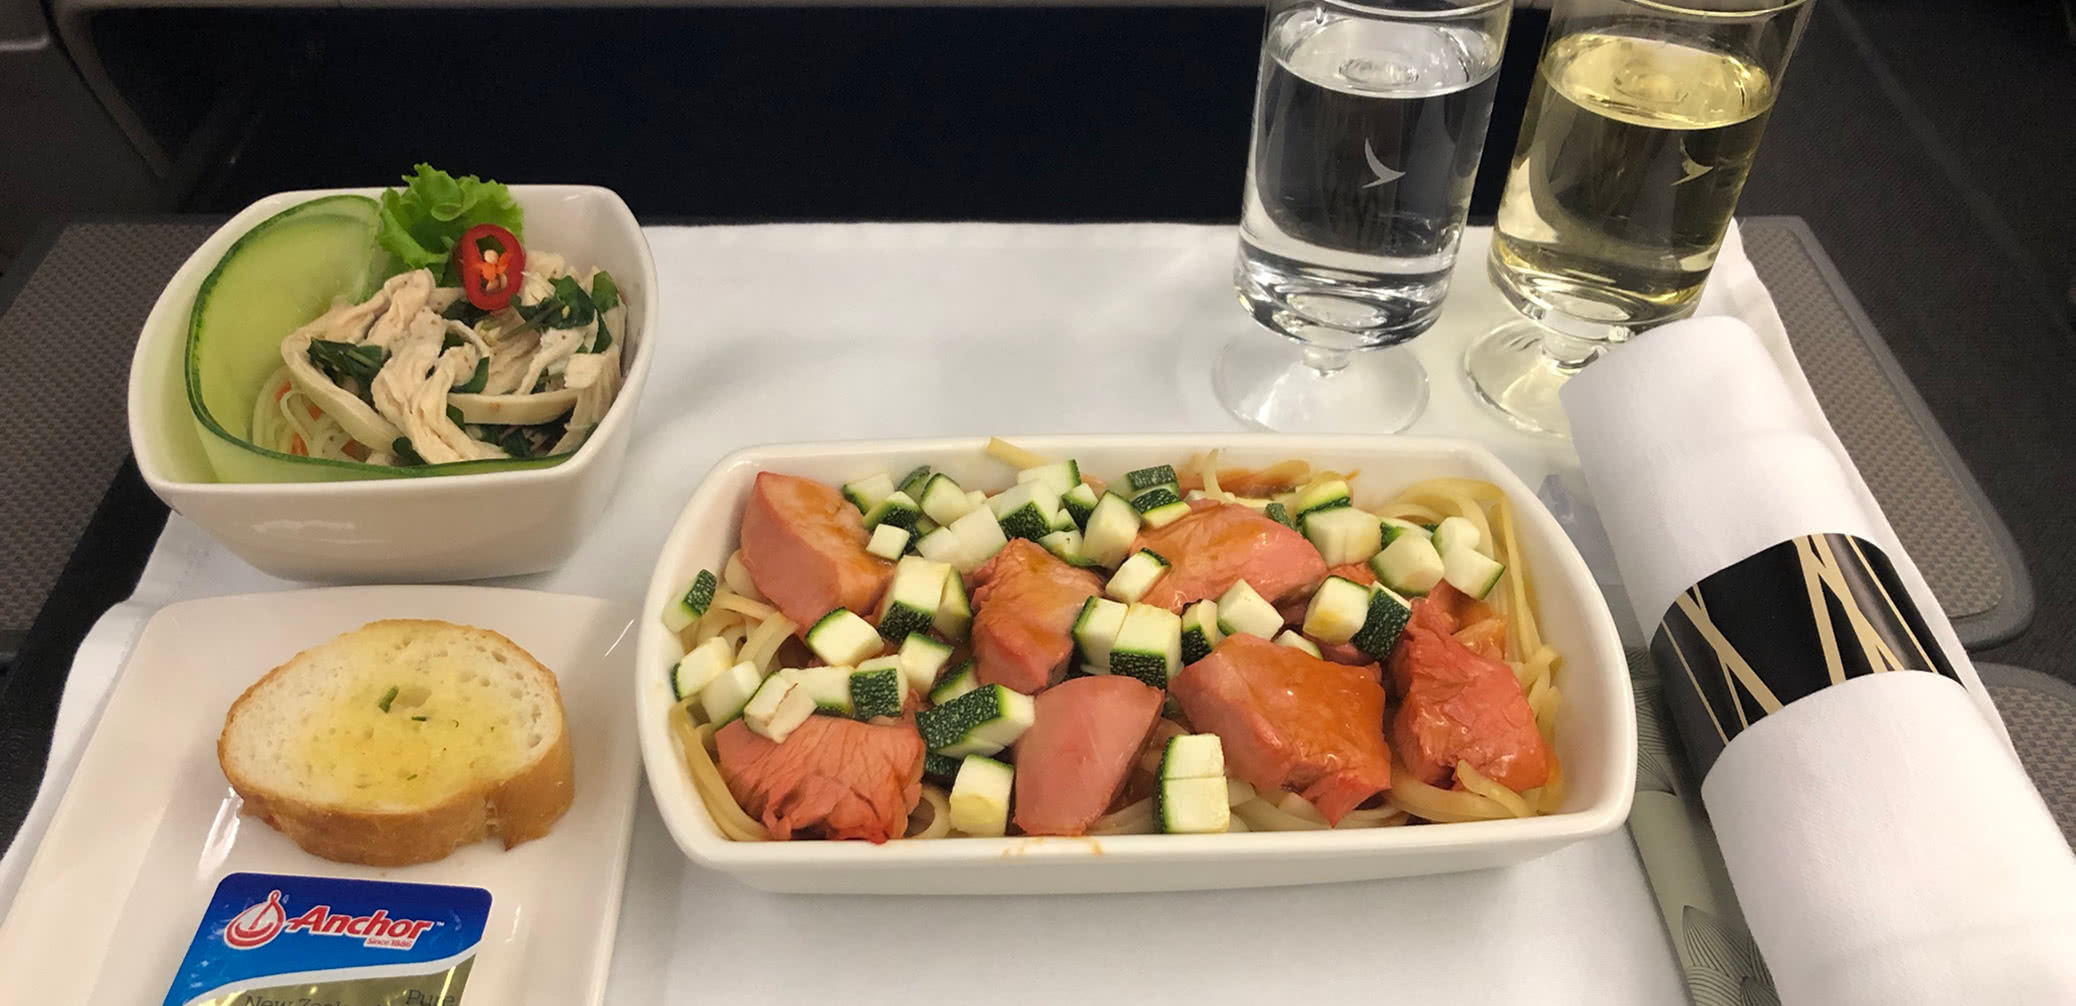 Cathay Dragon Business Class Review Comparison: A320 Vs A321